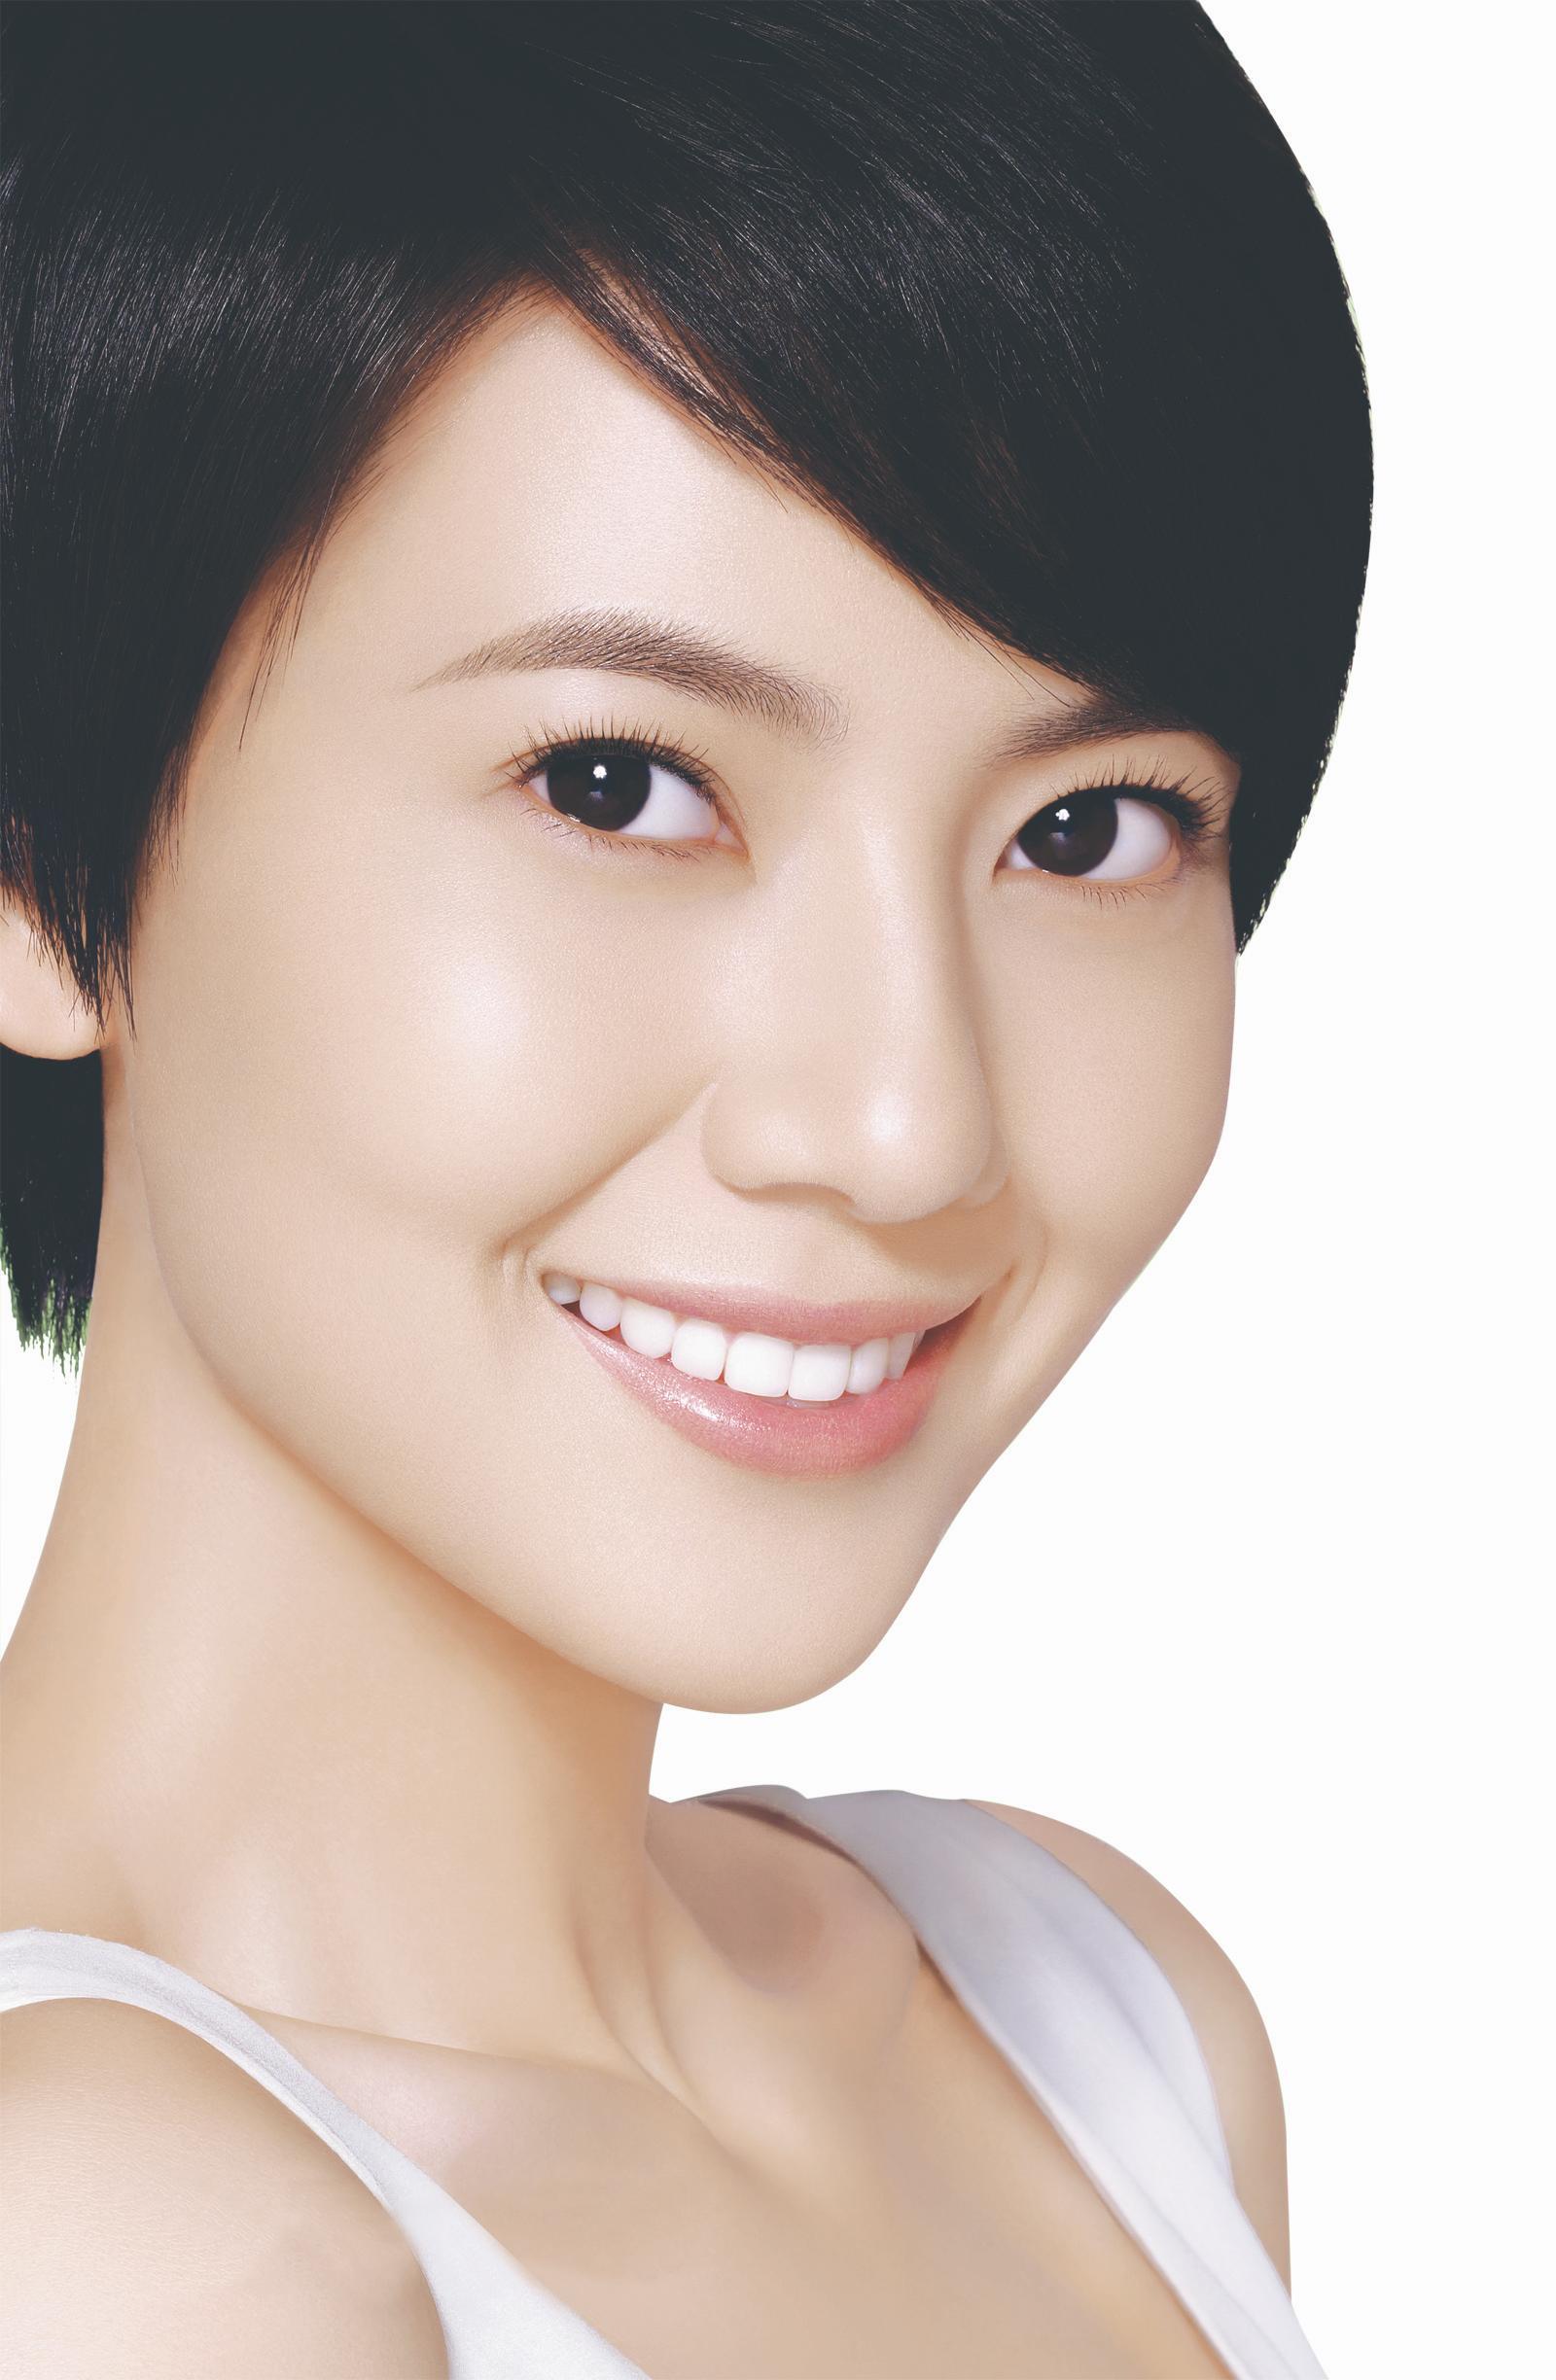 Gao Yuanyuan, the movie star of goddess of beauty